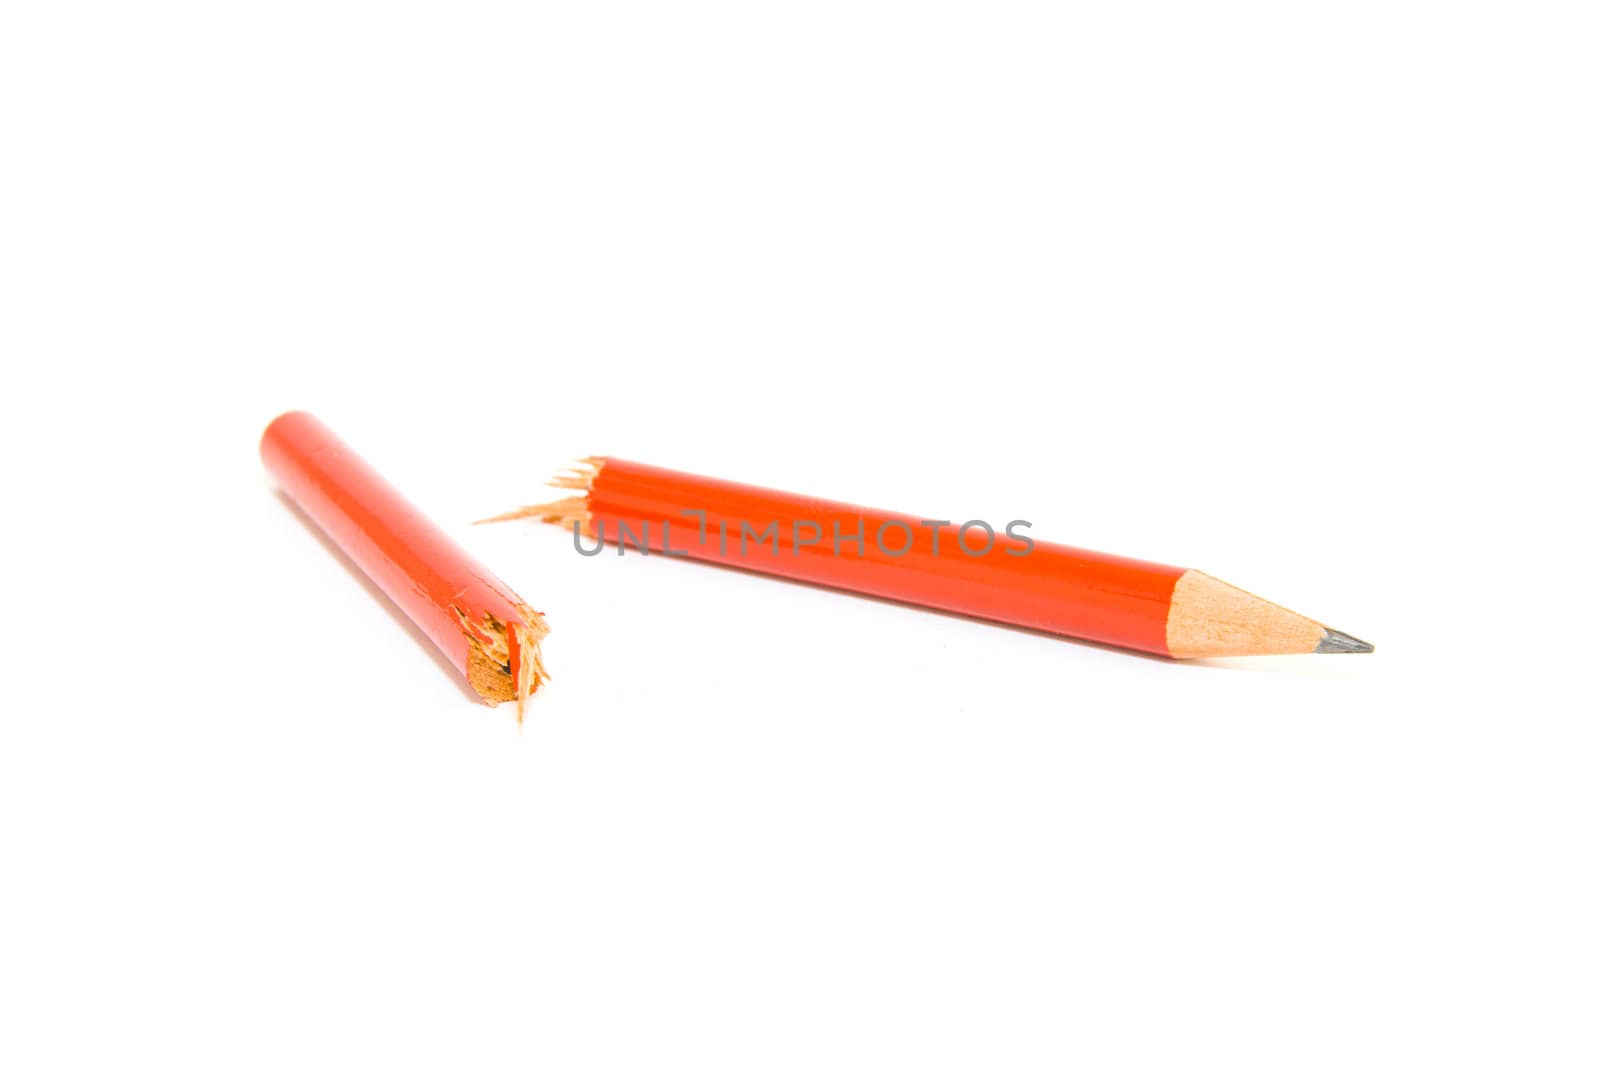 Red pencil snapped in two halfs on a white background